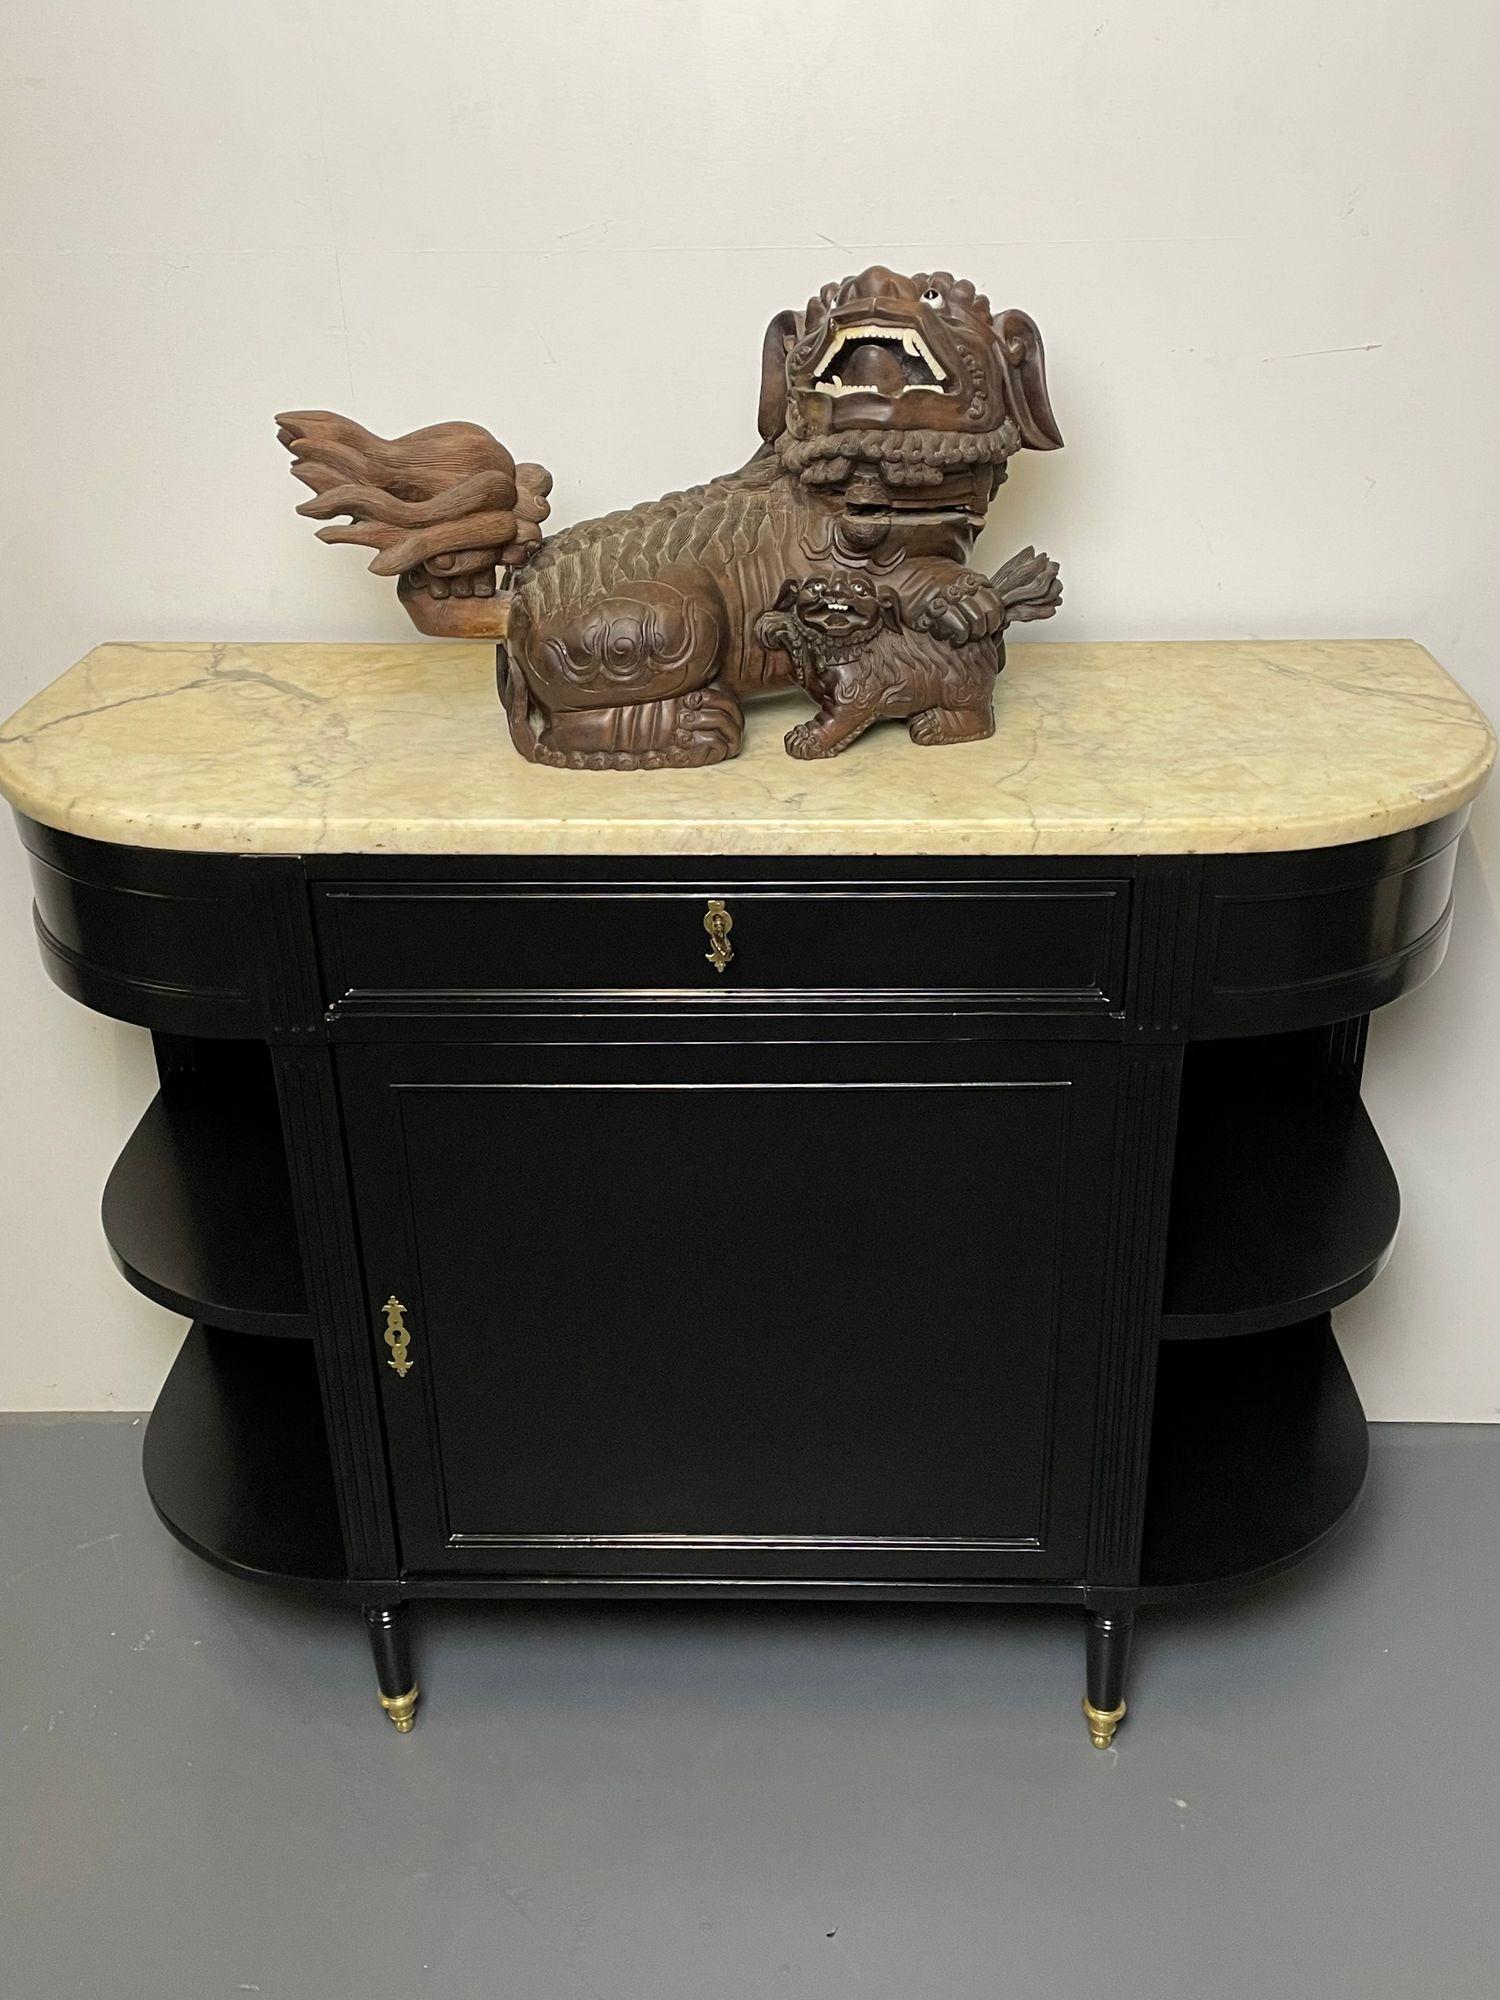 Pair of 18th/19th Century Solid Teak Foo Dogs, Opposing, Statuary For Sale 3